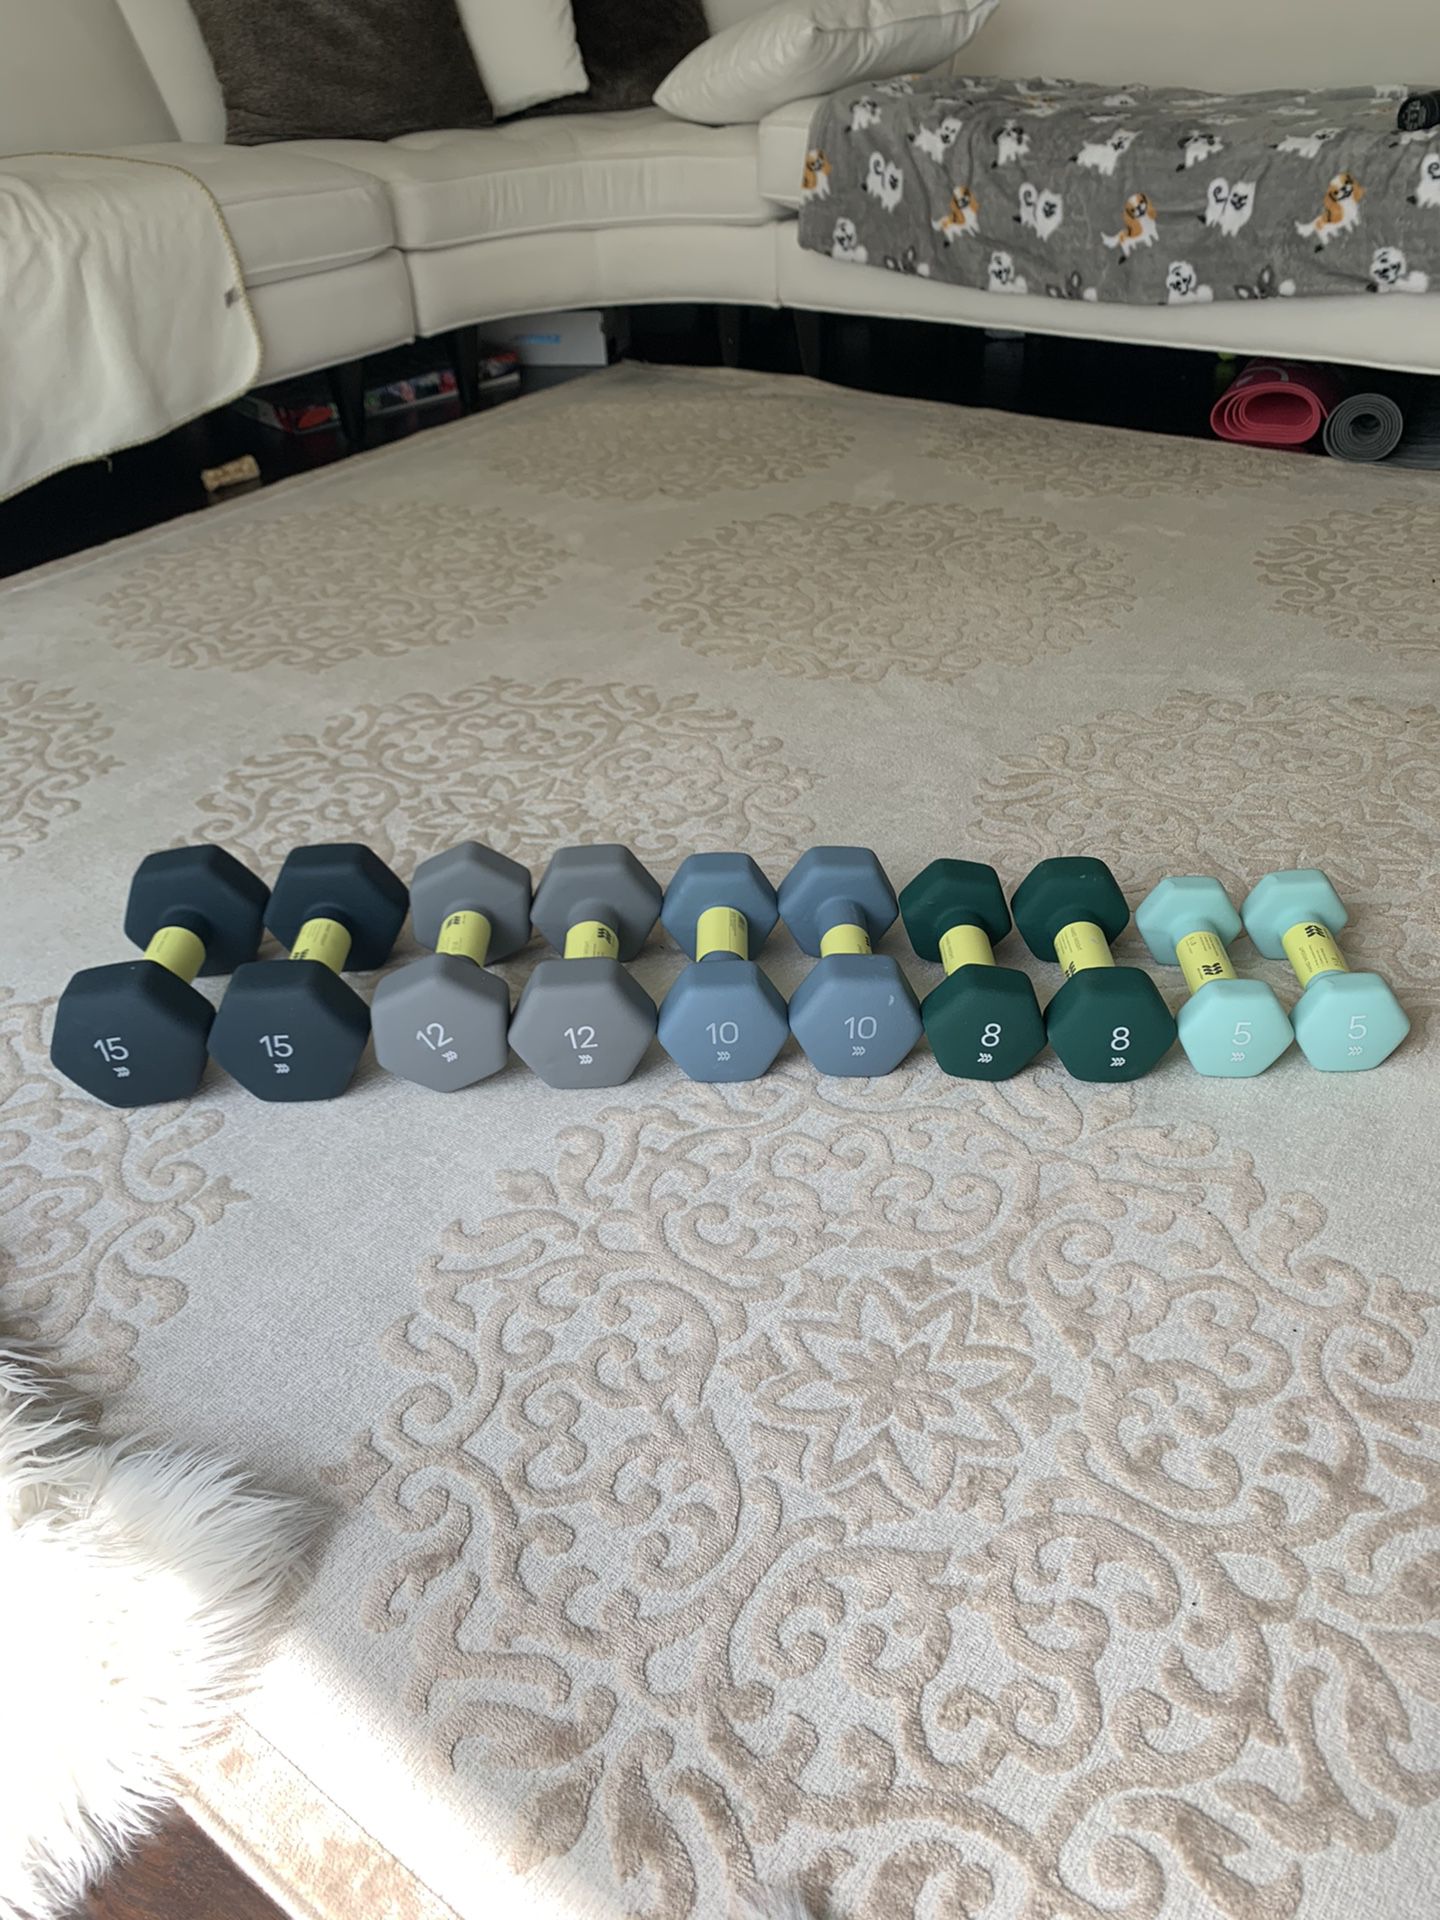 Full Set of Hand Weight Dumbbells (5,8,10,12,15 lbs)